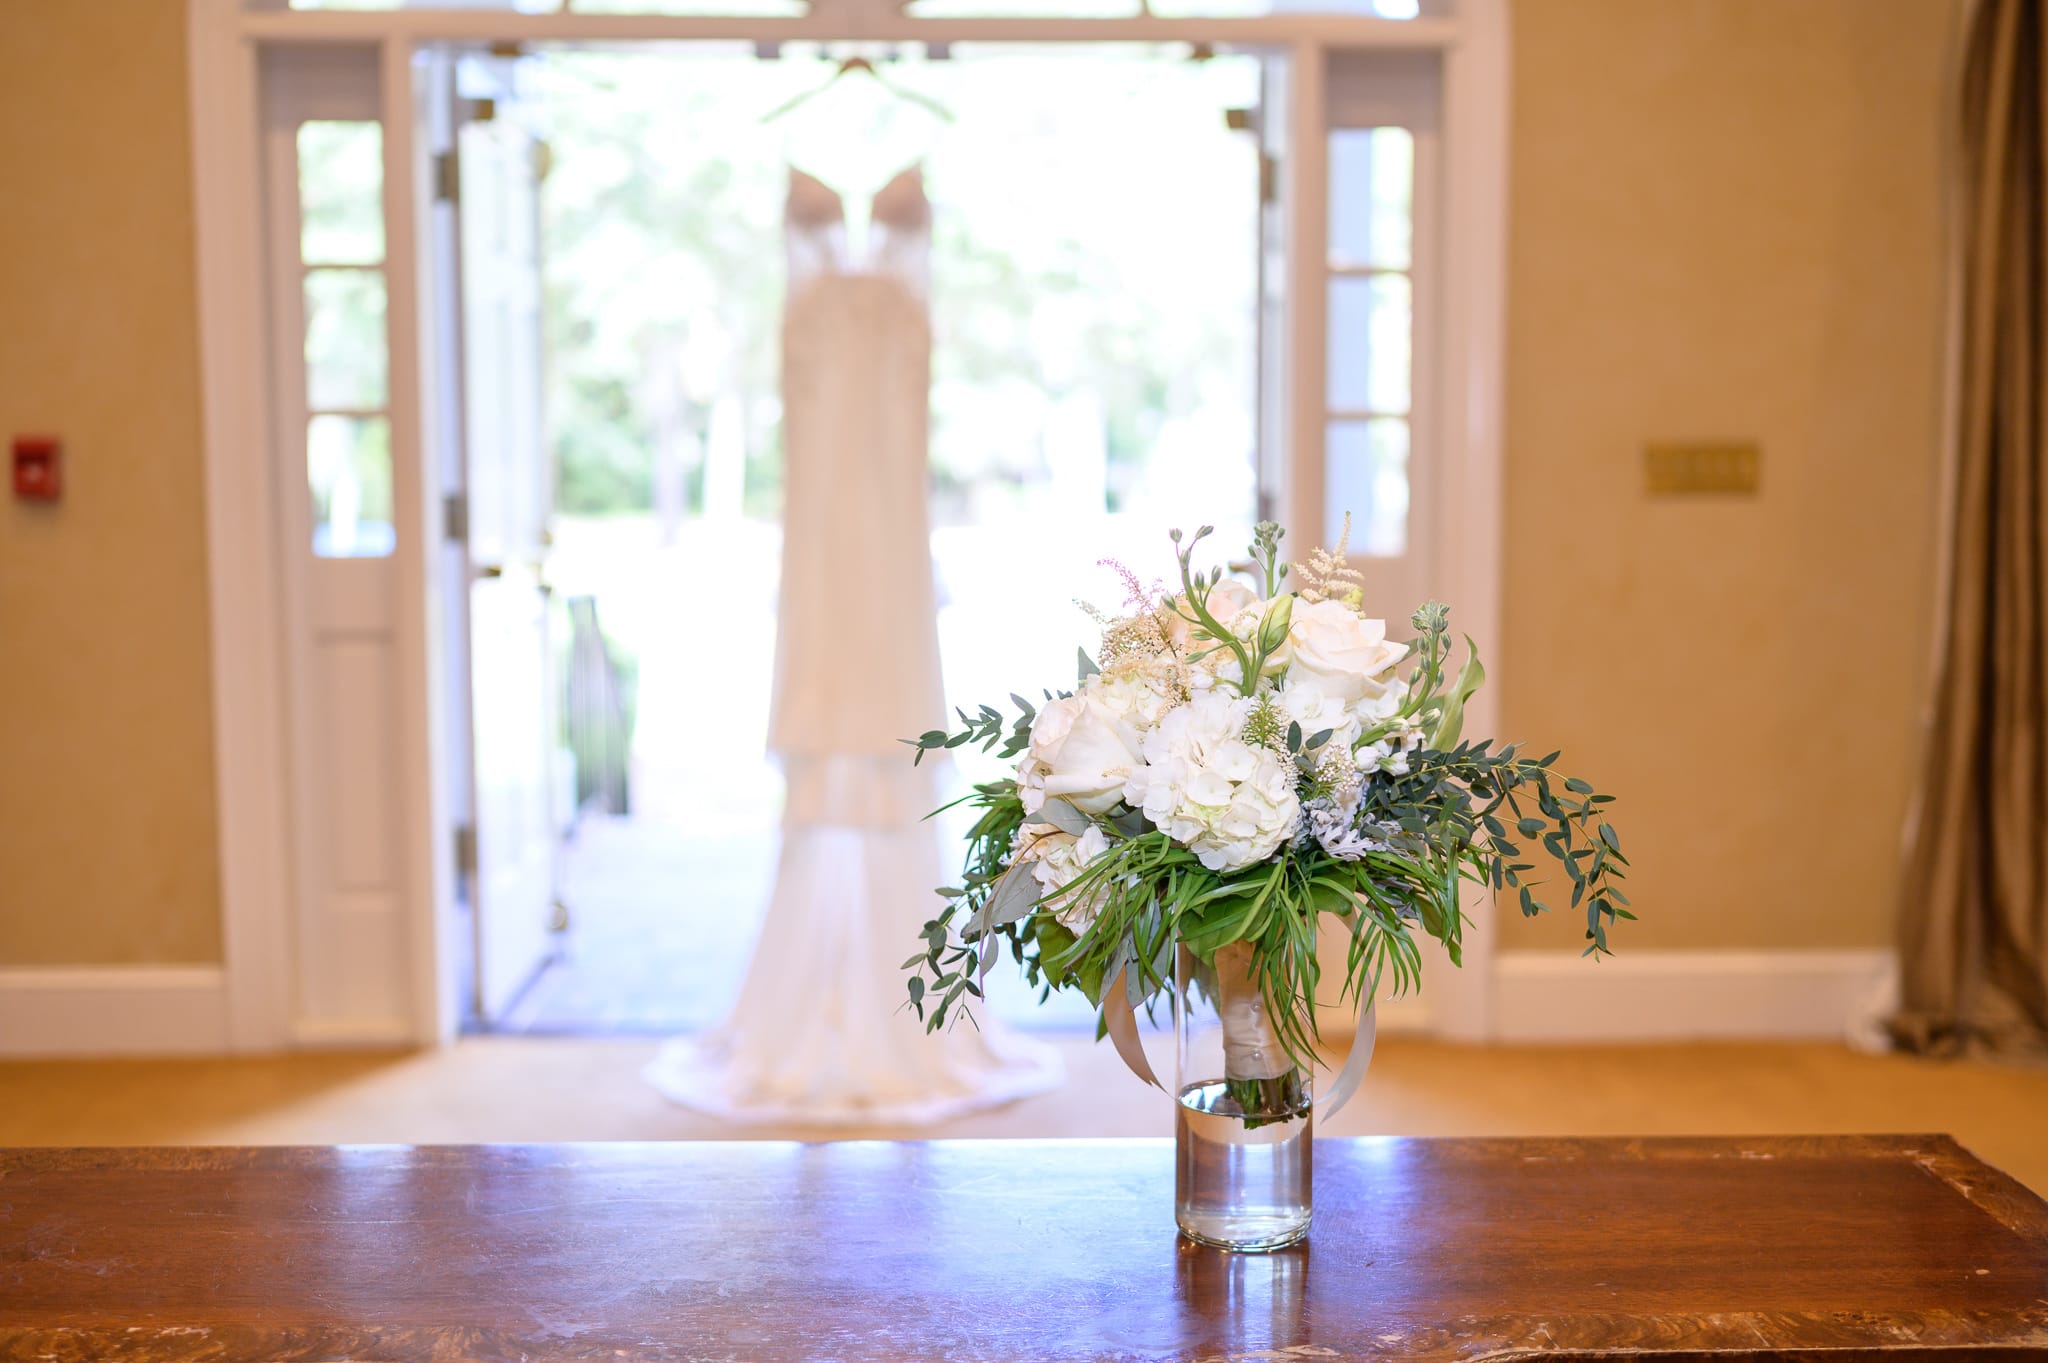 Bouquet with dress in background - Pawleys Plantation